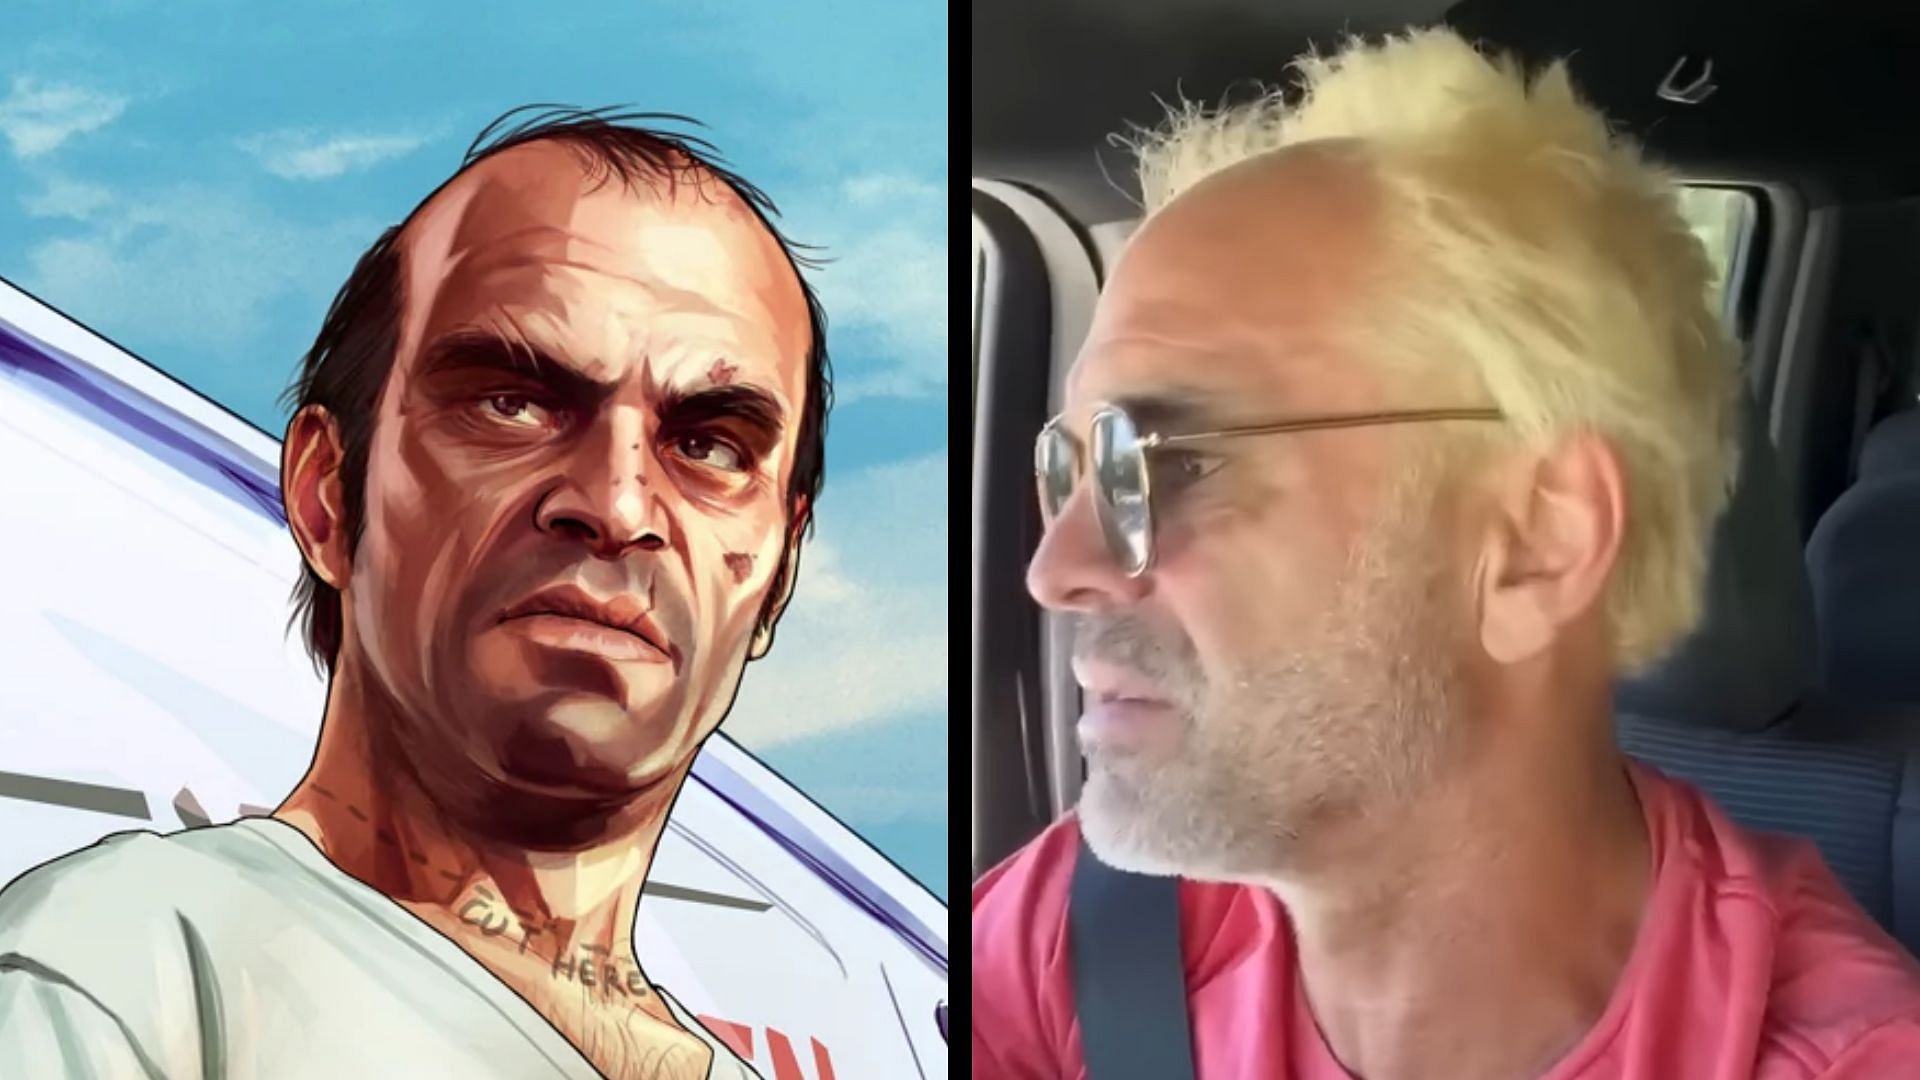 Trevor Philips’ voice actor does a Cameo video related to GTA 6, and it doesn’t end well